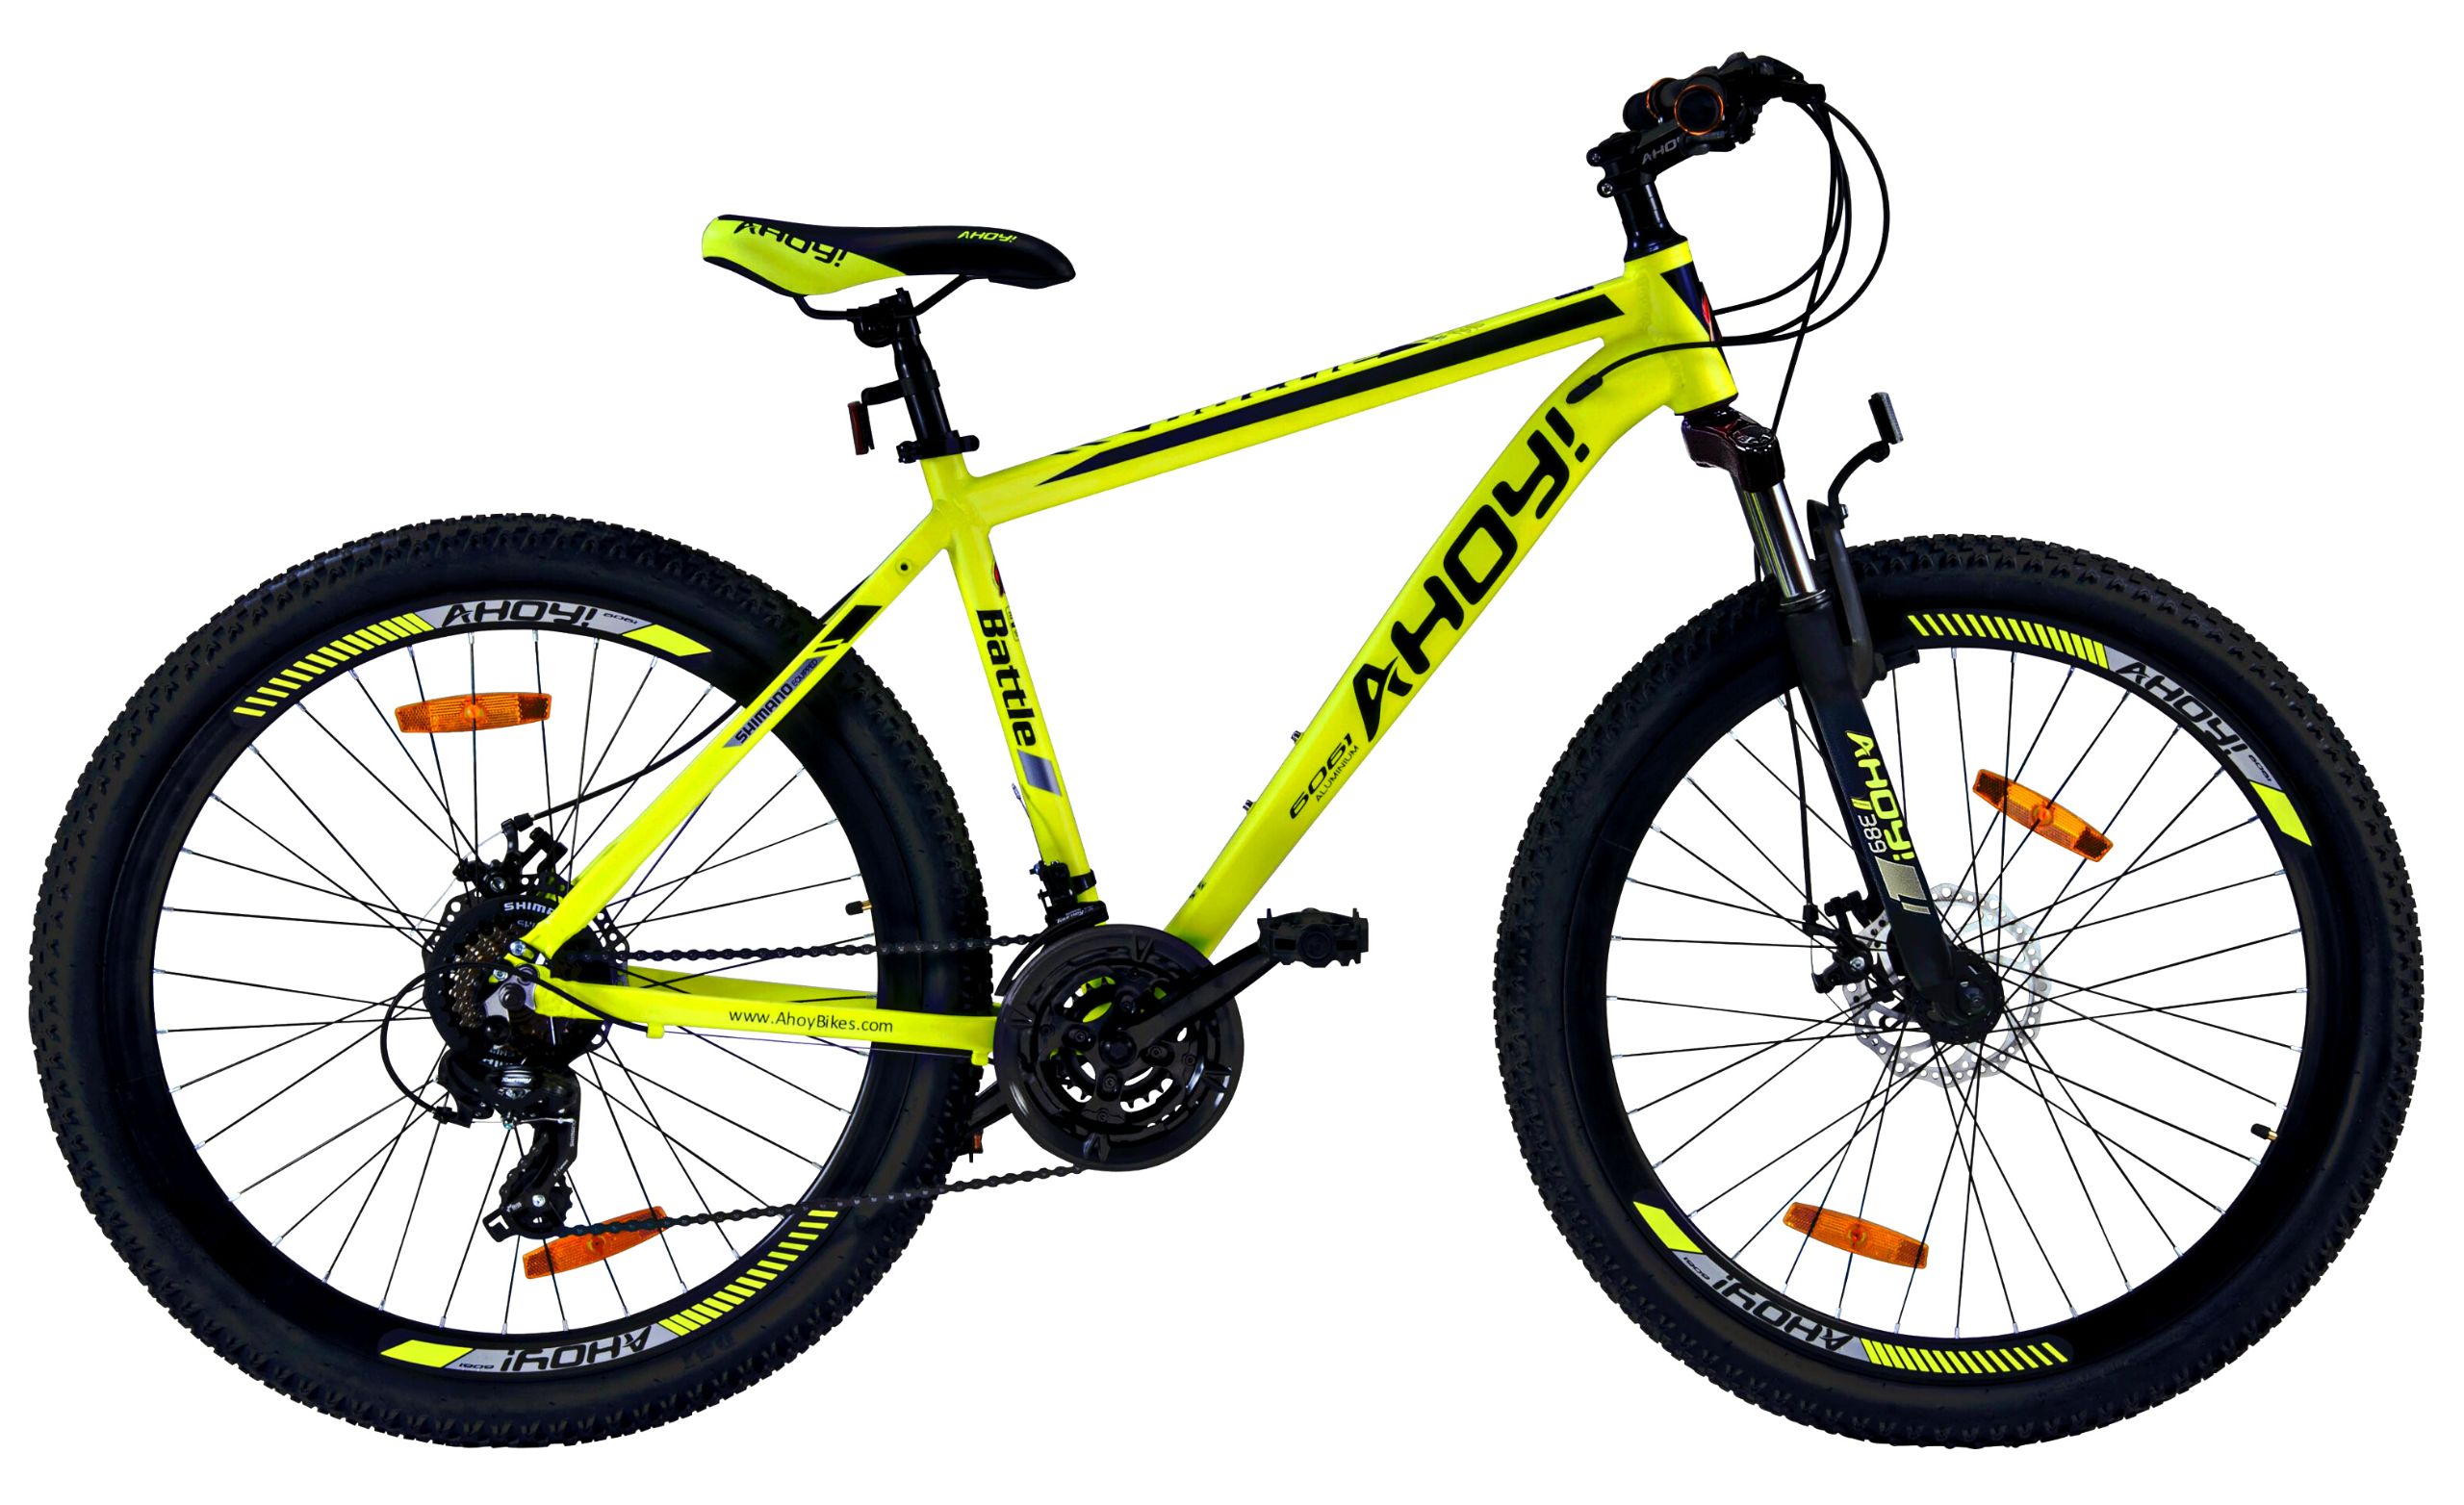 Buy Battle 2.1 Mountain Cycle 27.5T Cycle with Shimano gear Yellow